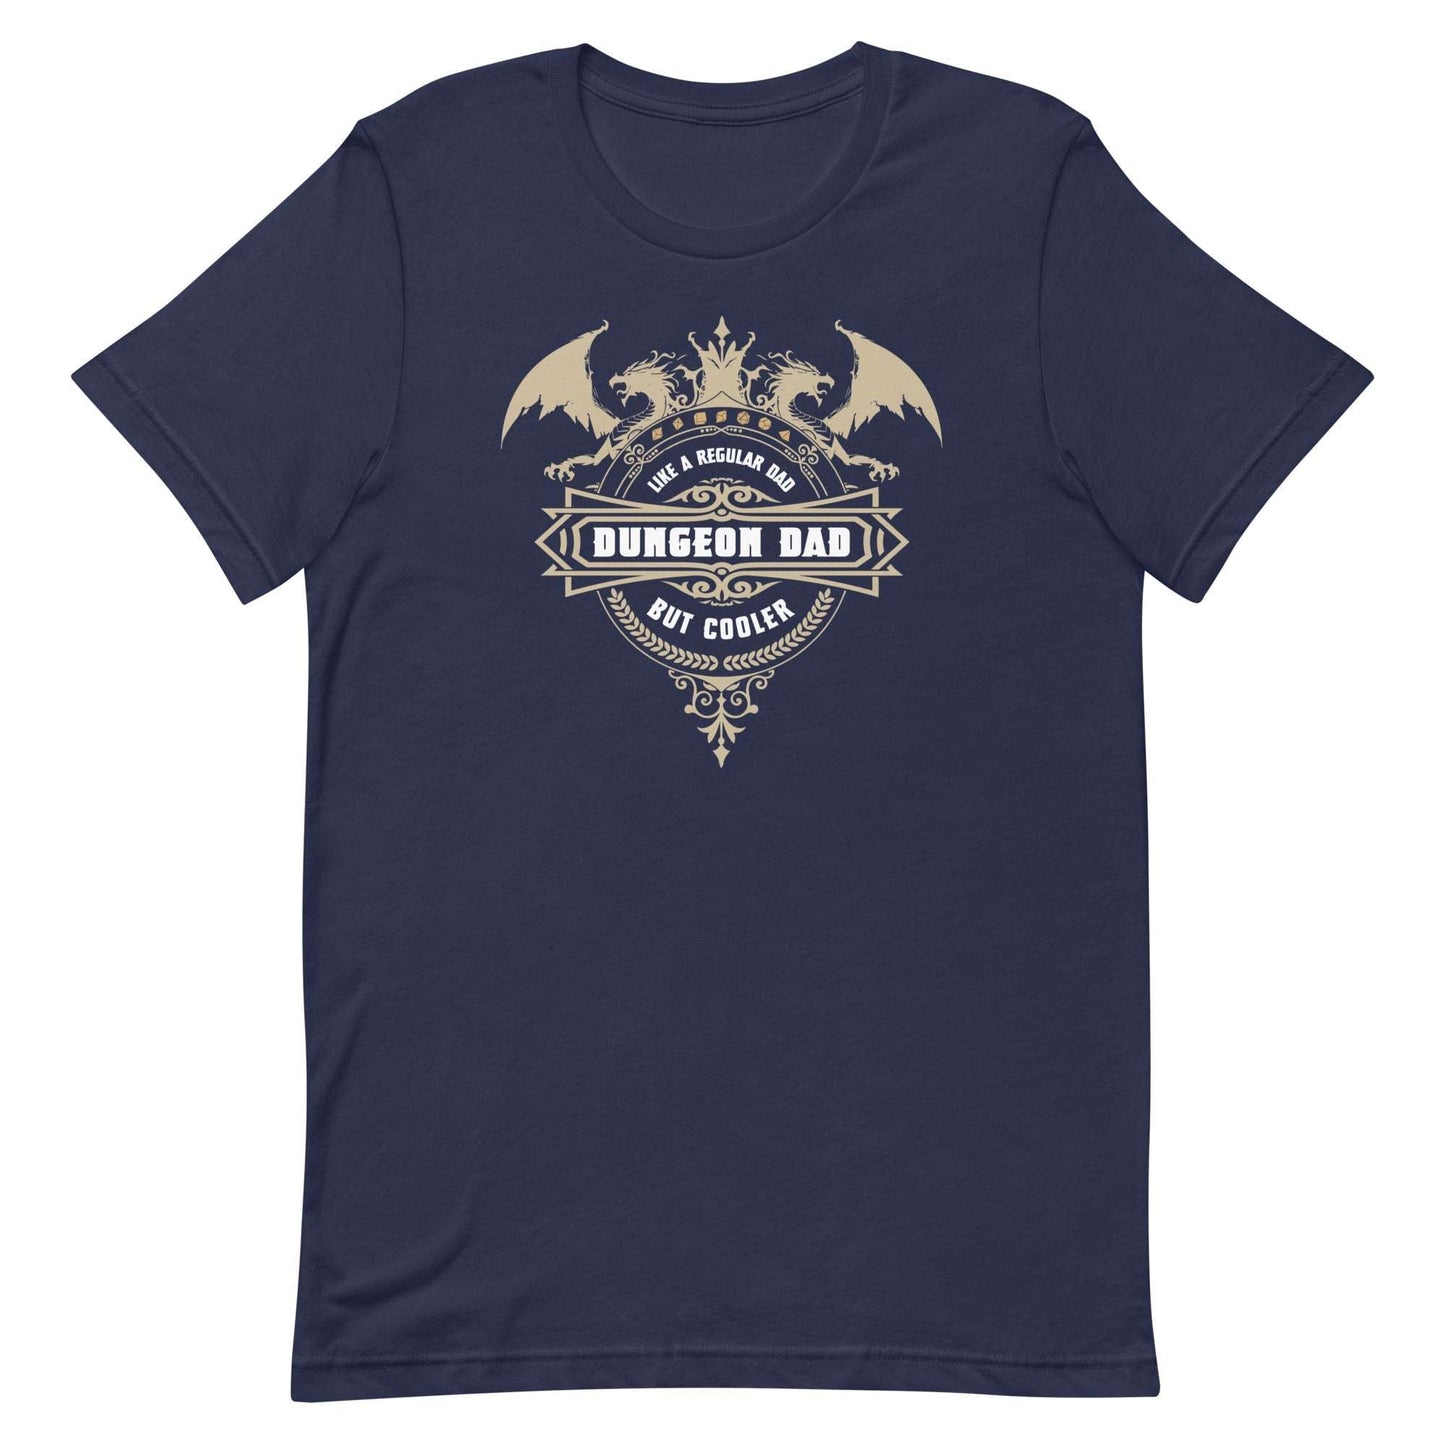 DnD Dungeon Dad Shirt - Dungeons & Dragons Father's Day T-shirt T-Shirt Navy / XS